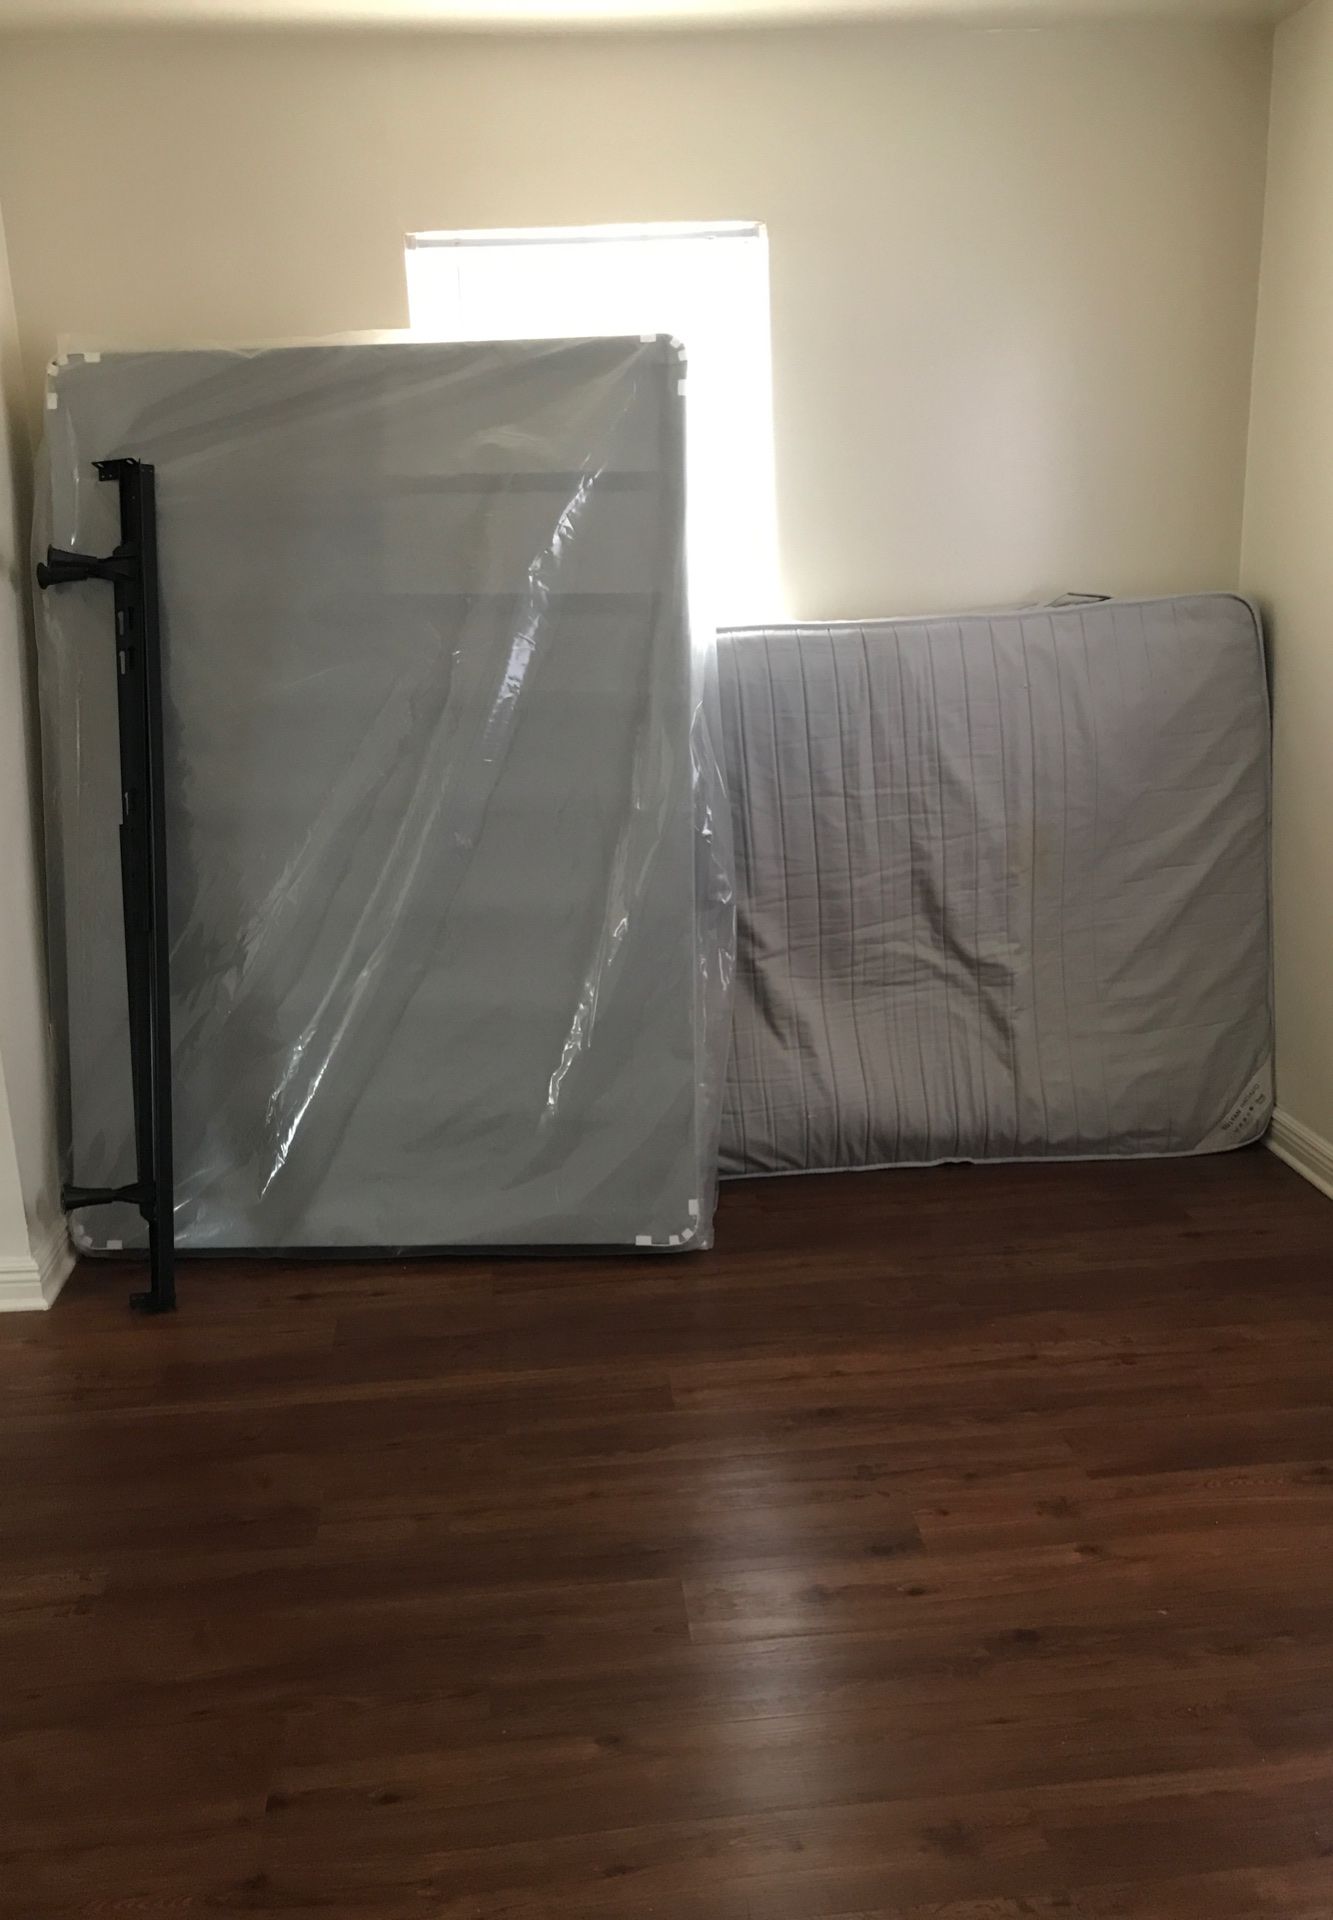 Full size mattress and box spring in a four-door dresser